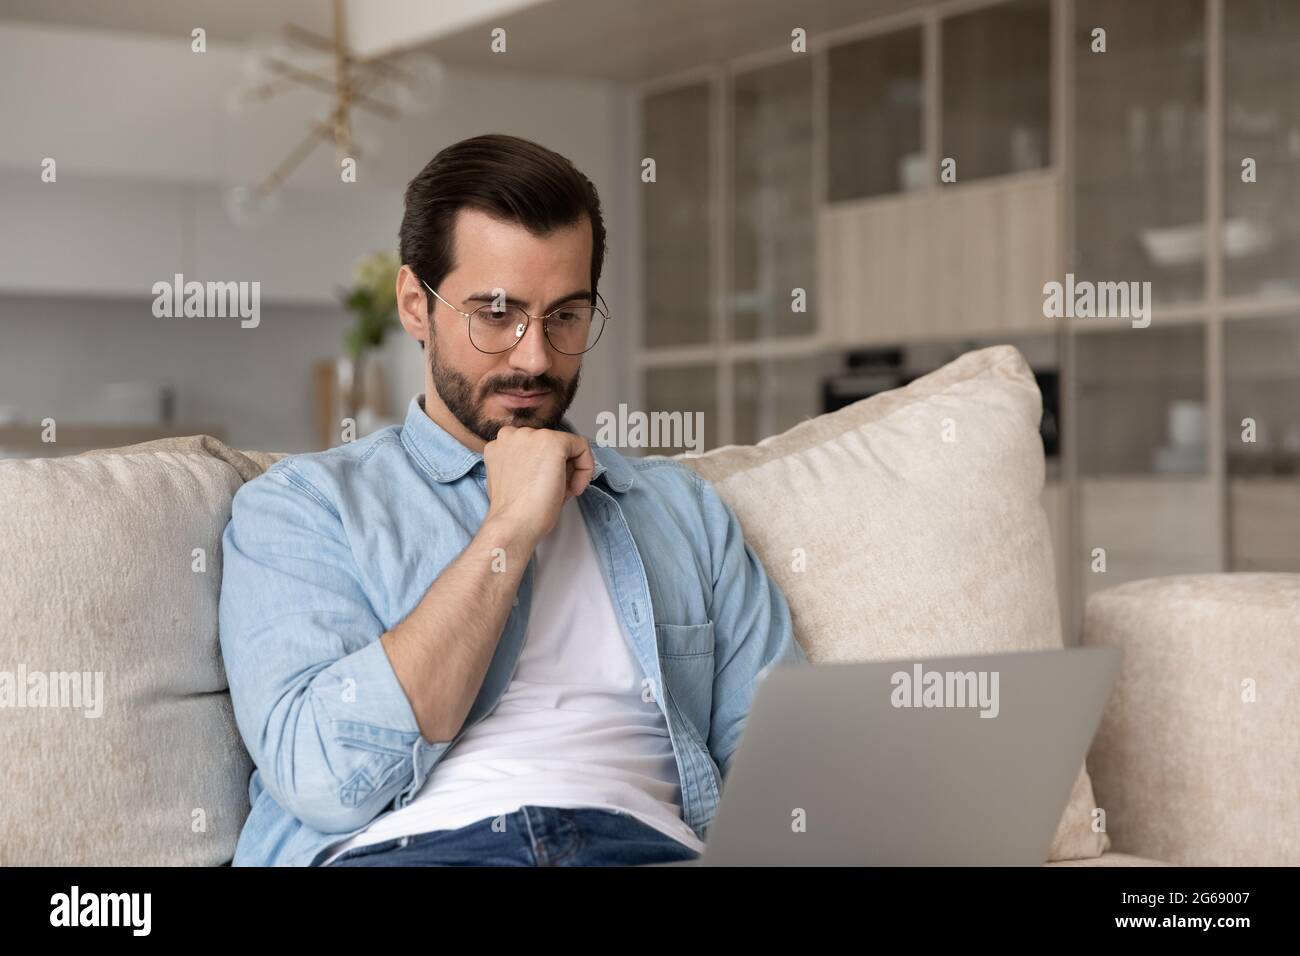 Thoughtful man in glasses looking at laptop screen, working online Stock Photo